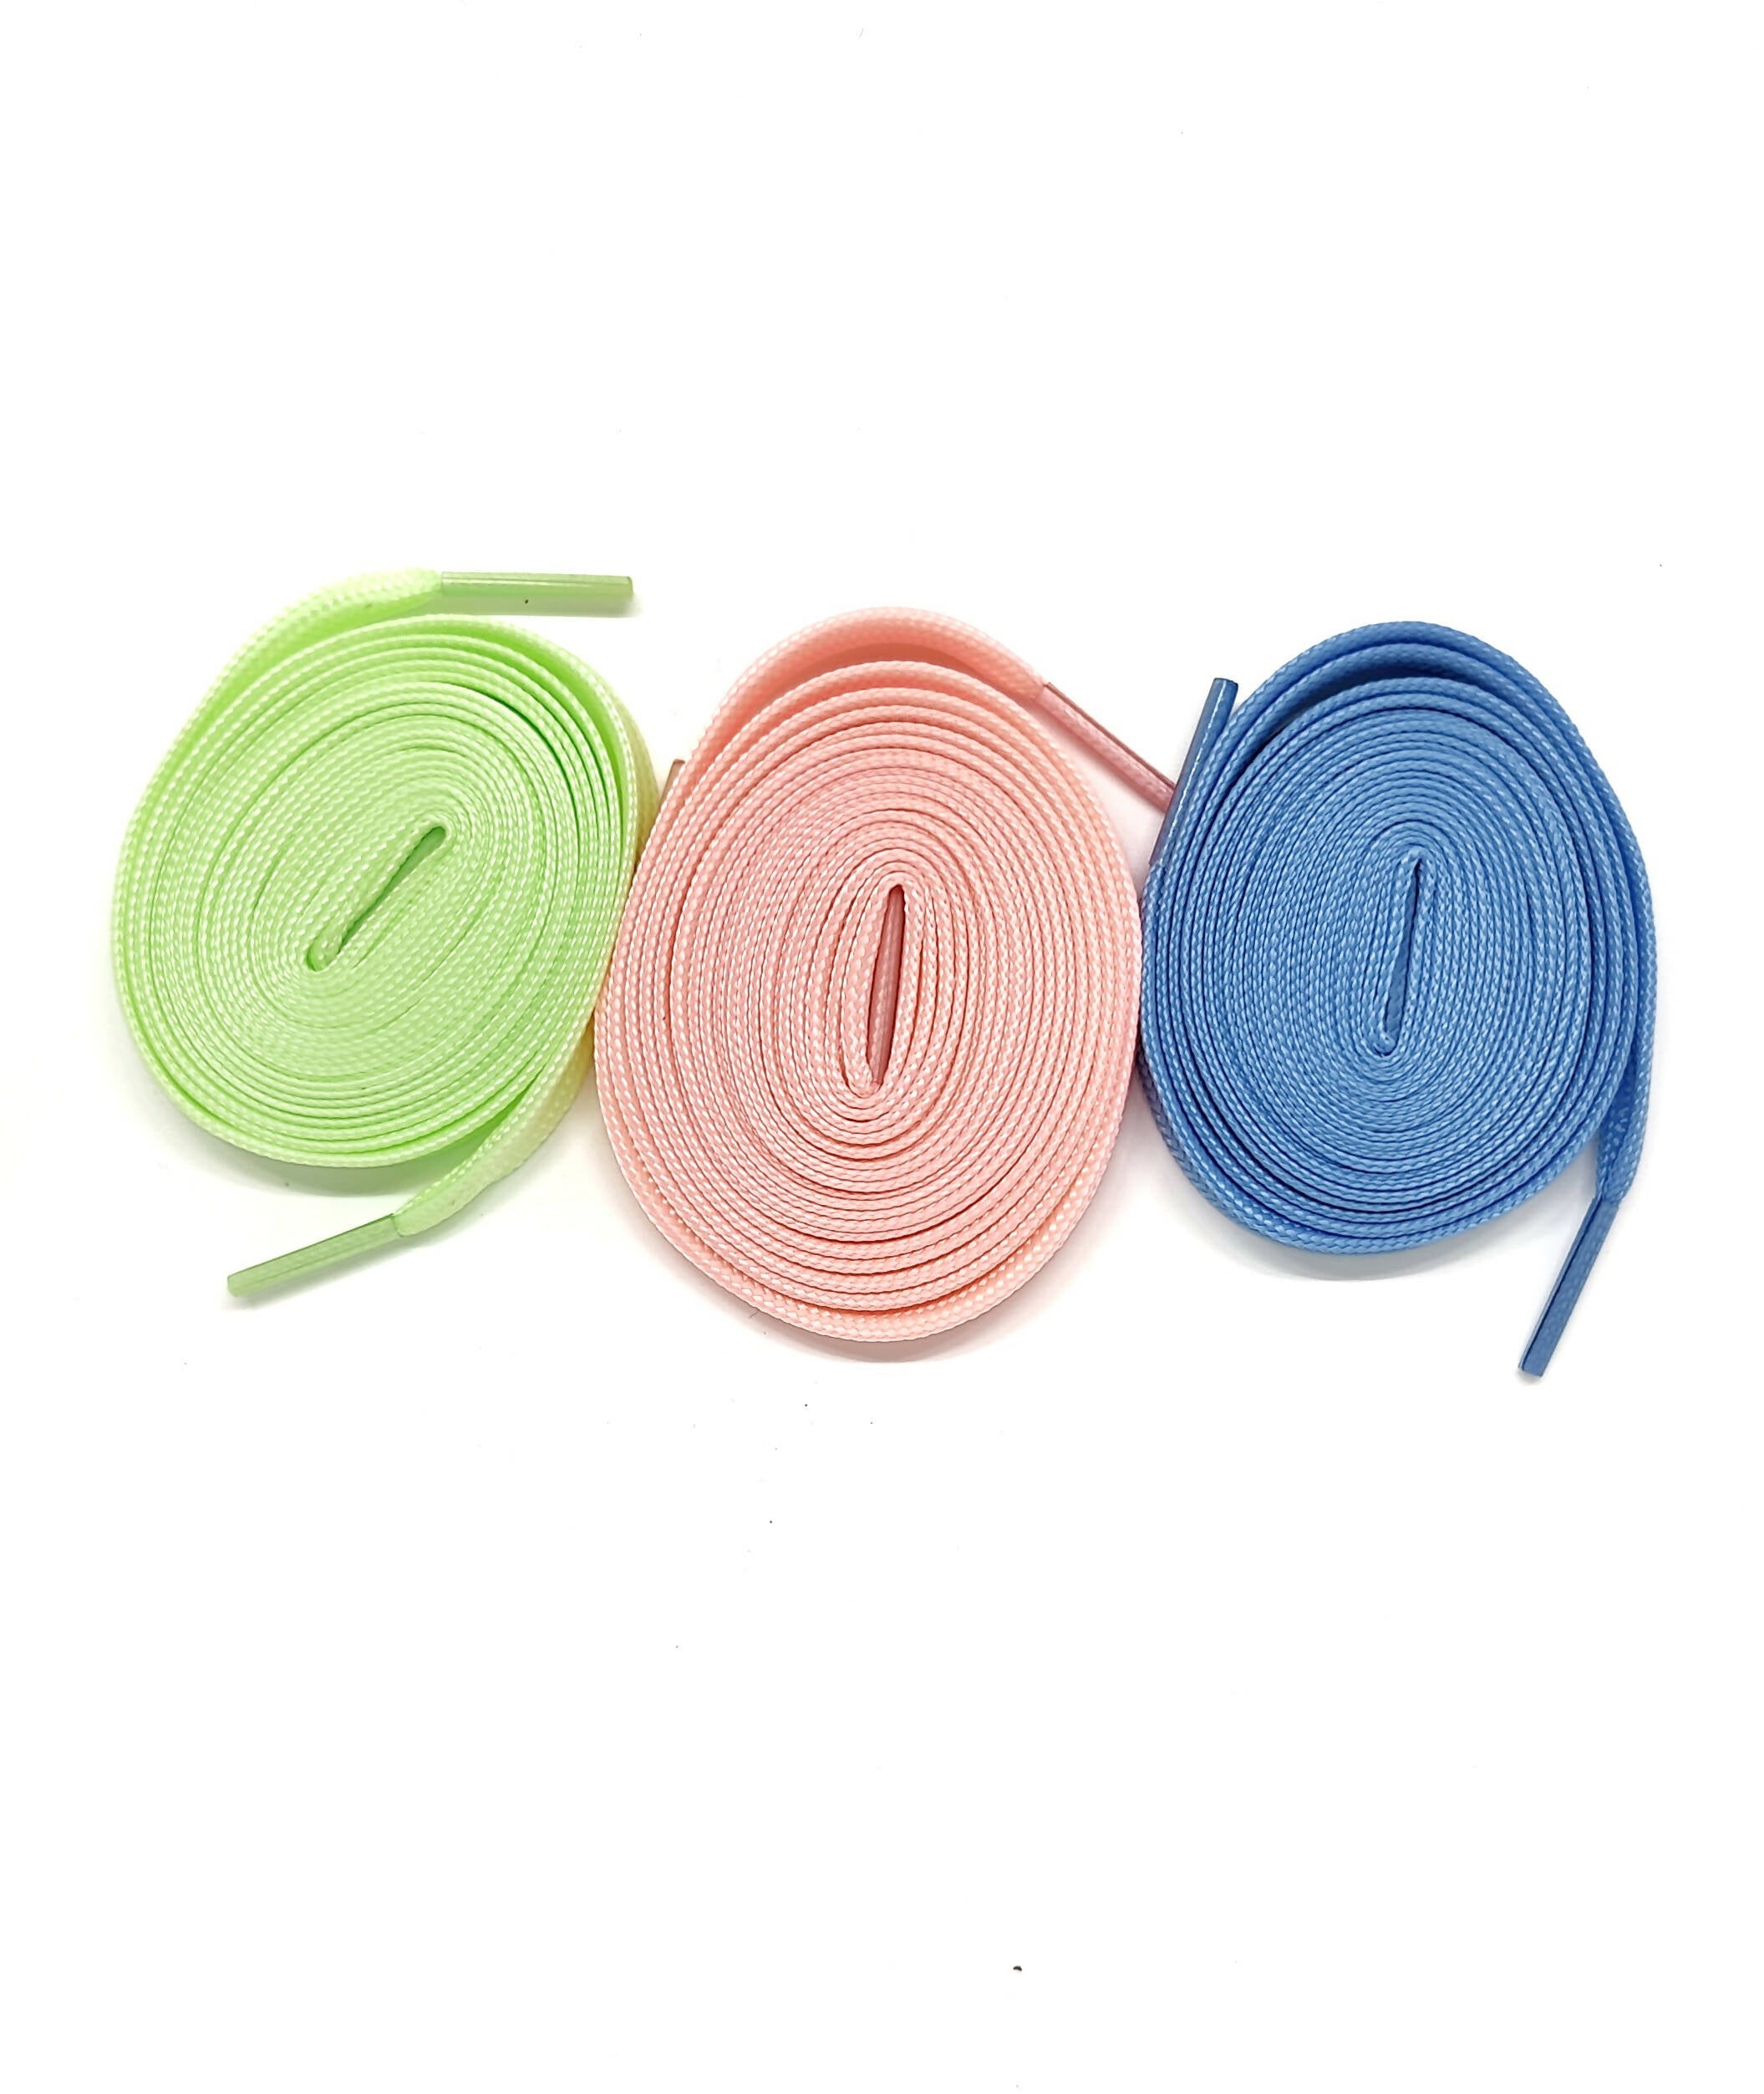 Glow in the Dark Laces Combo Packs by thegoodlace